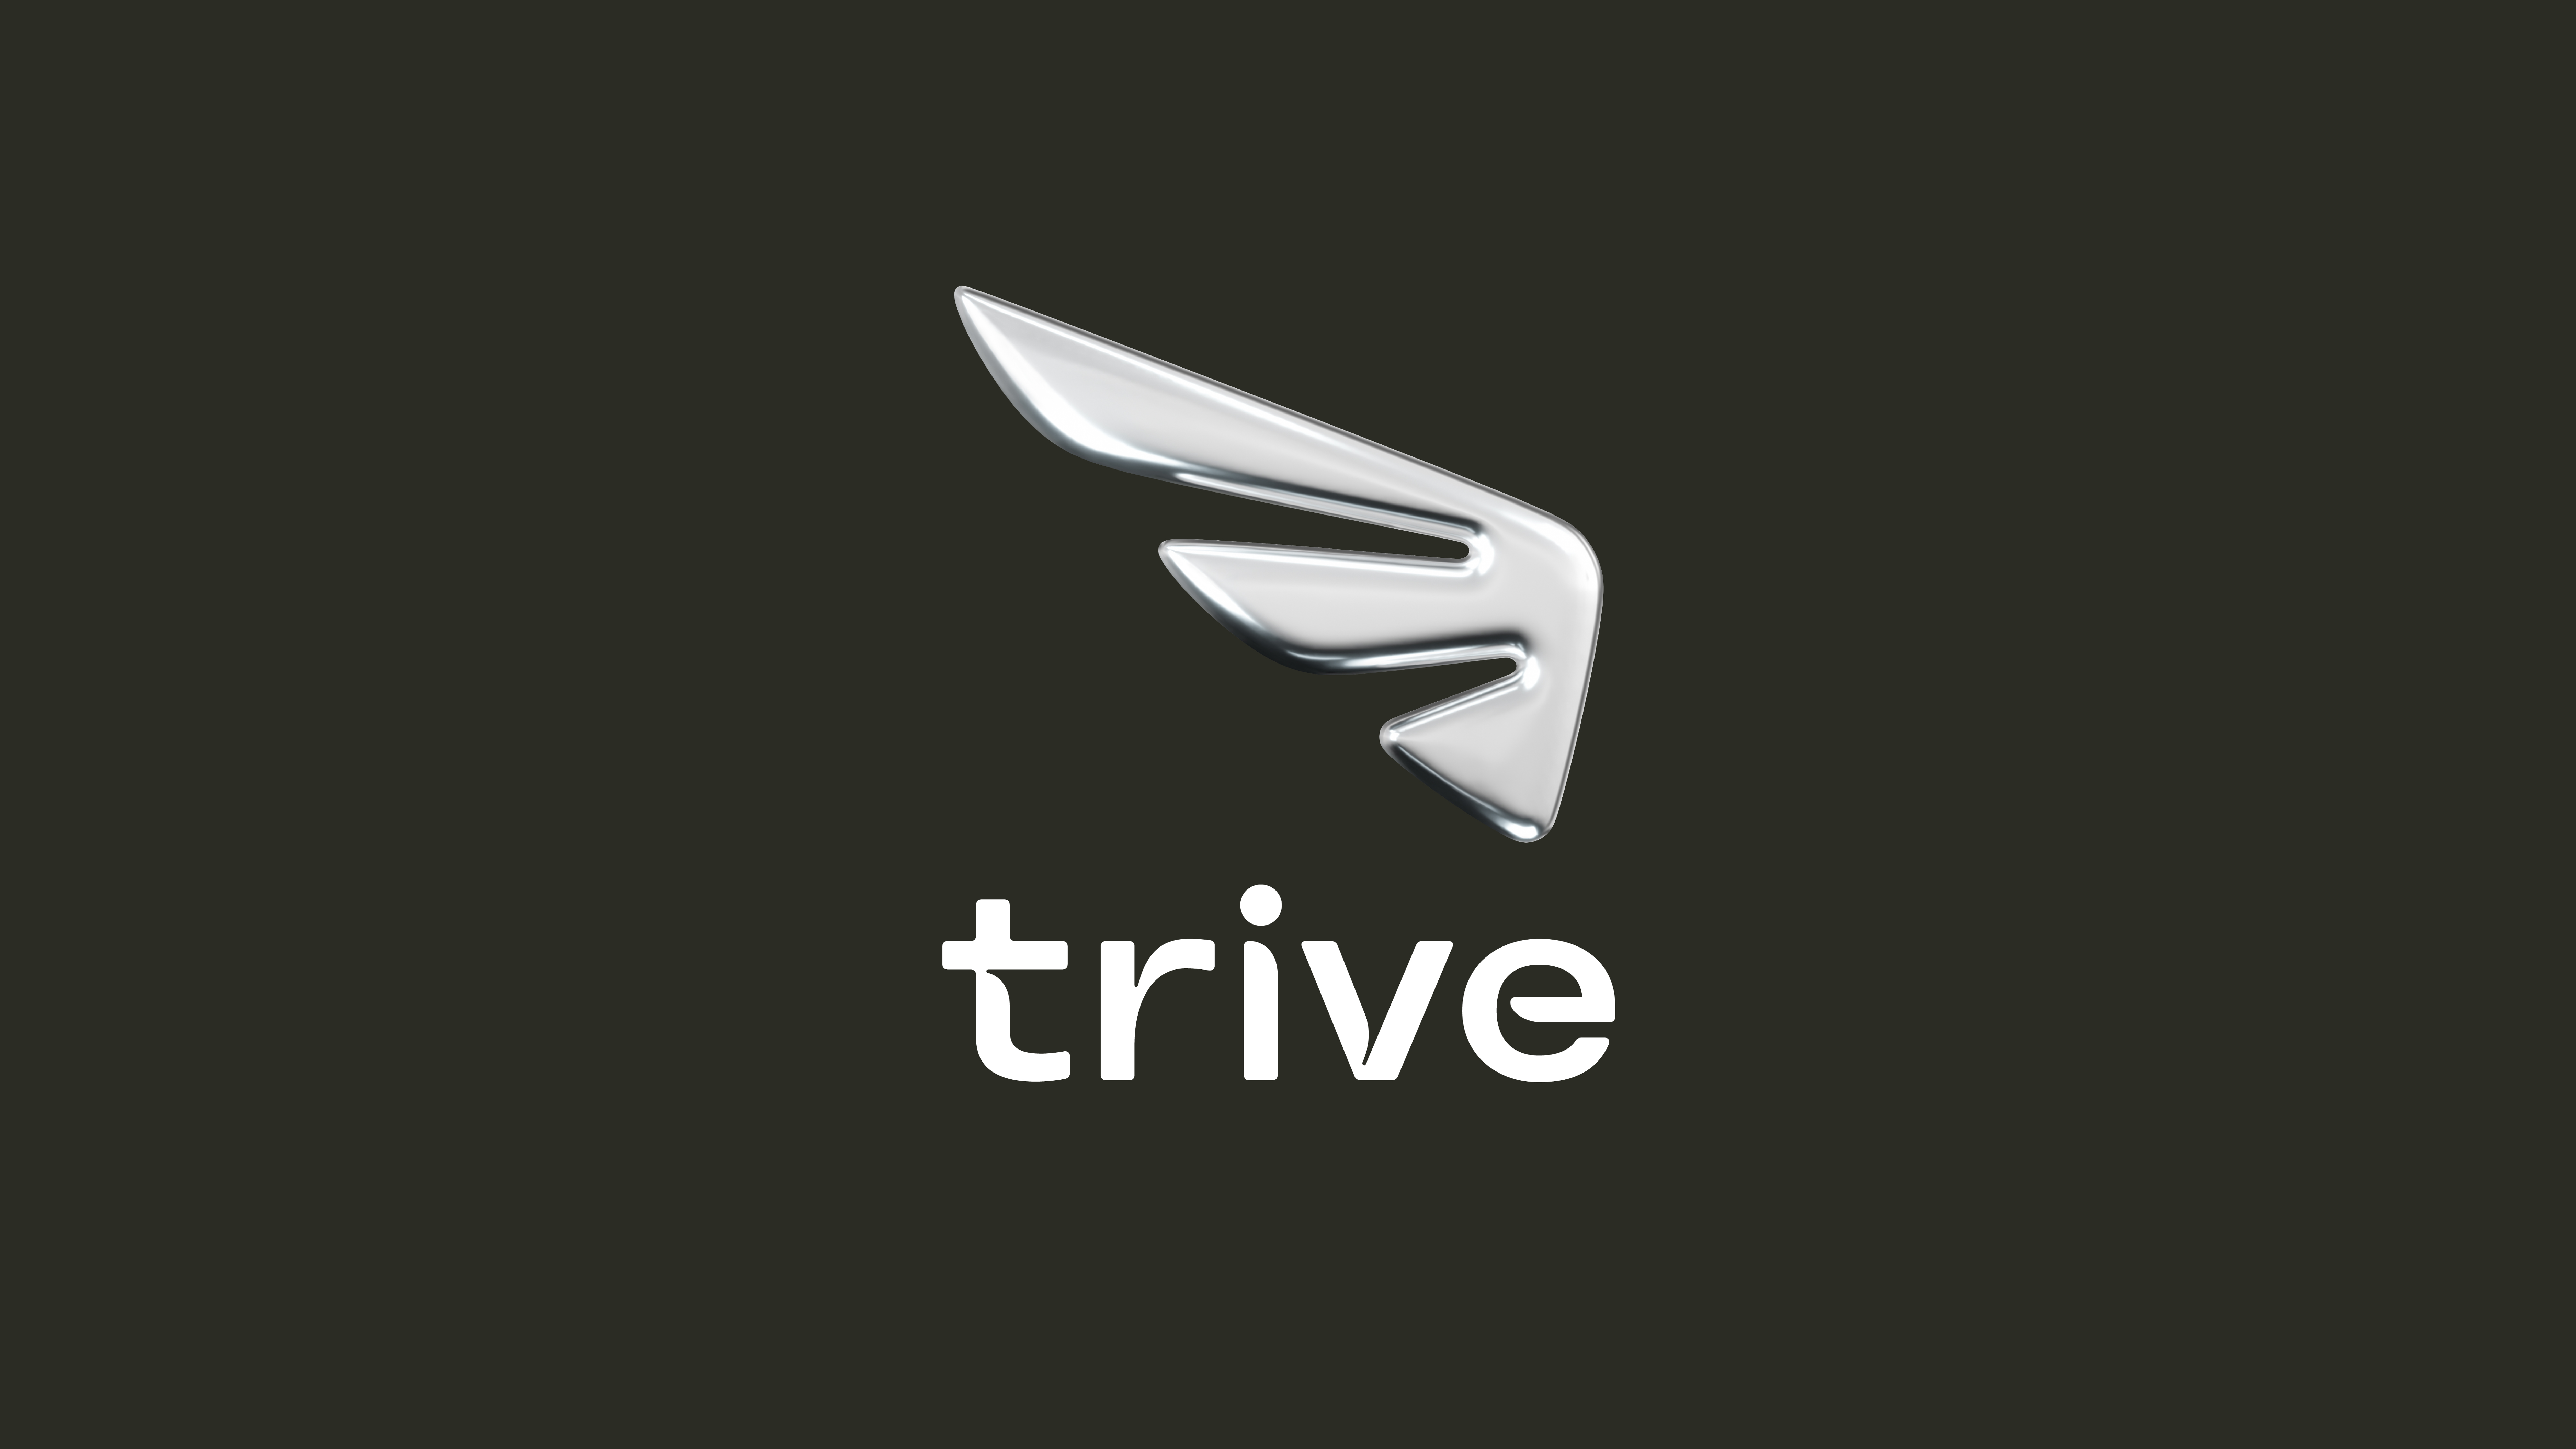 Trive Partners With BrandOpus to Deliver a New Dynamic and Disruptive Brand Identity System